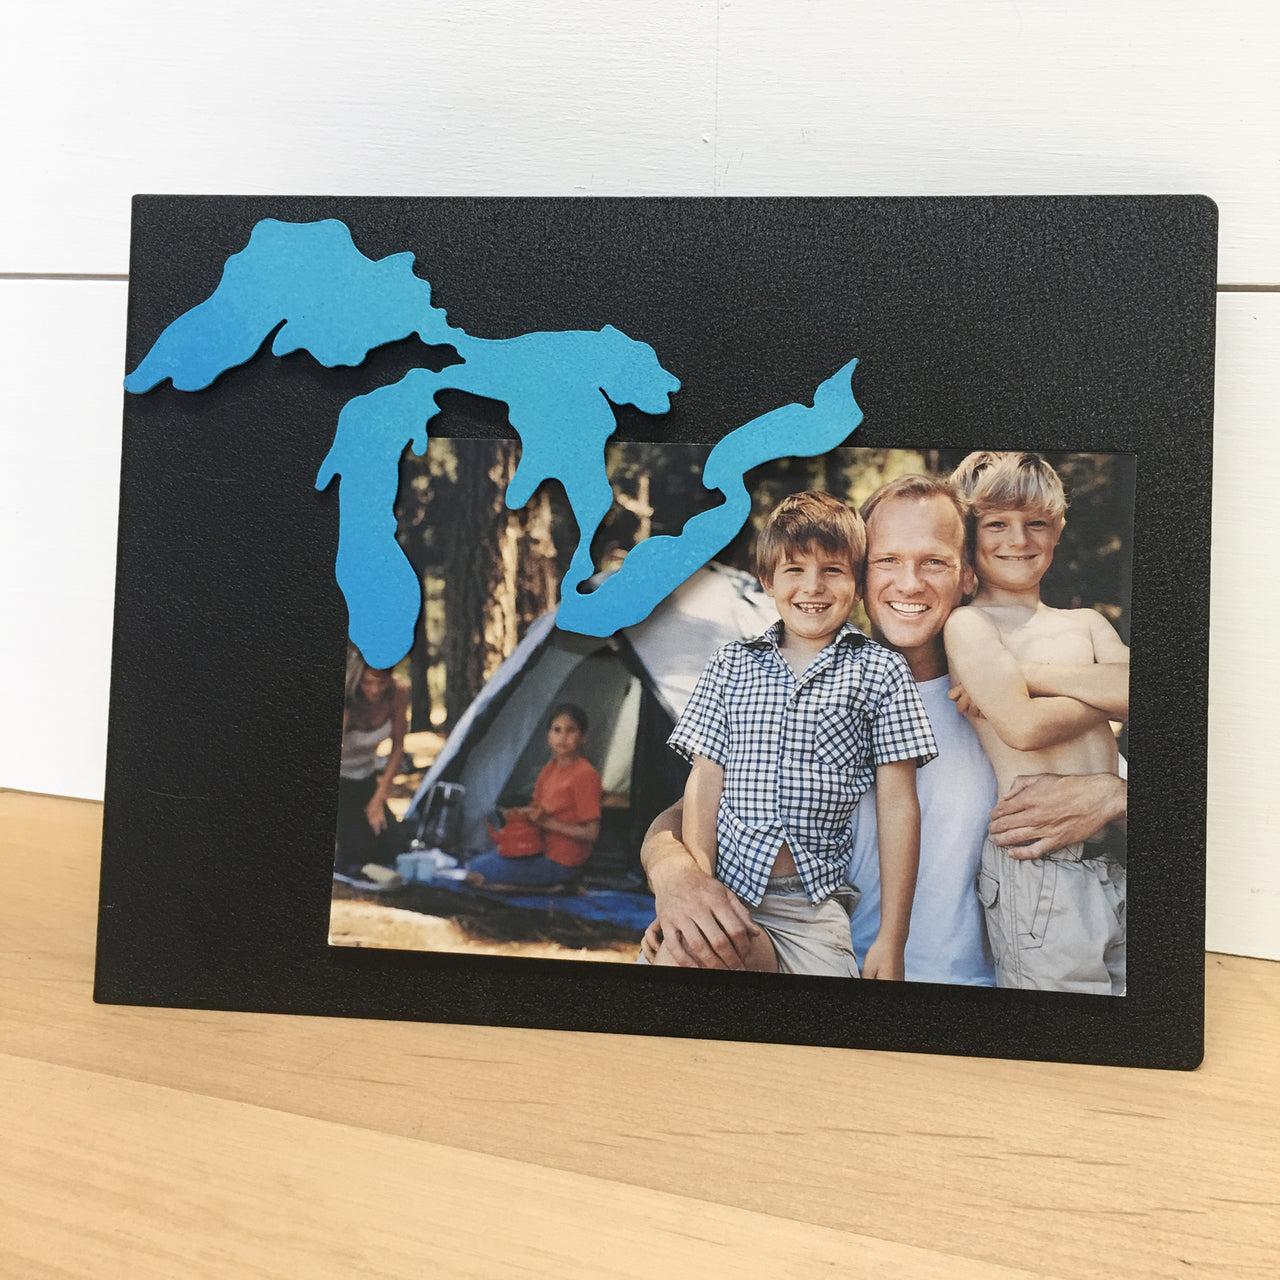 The Great Lakes Magnet